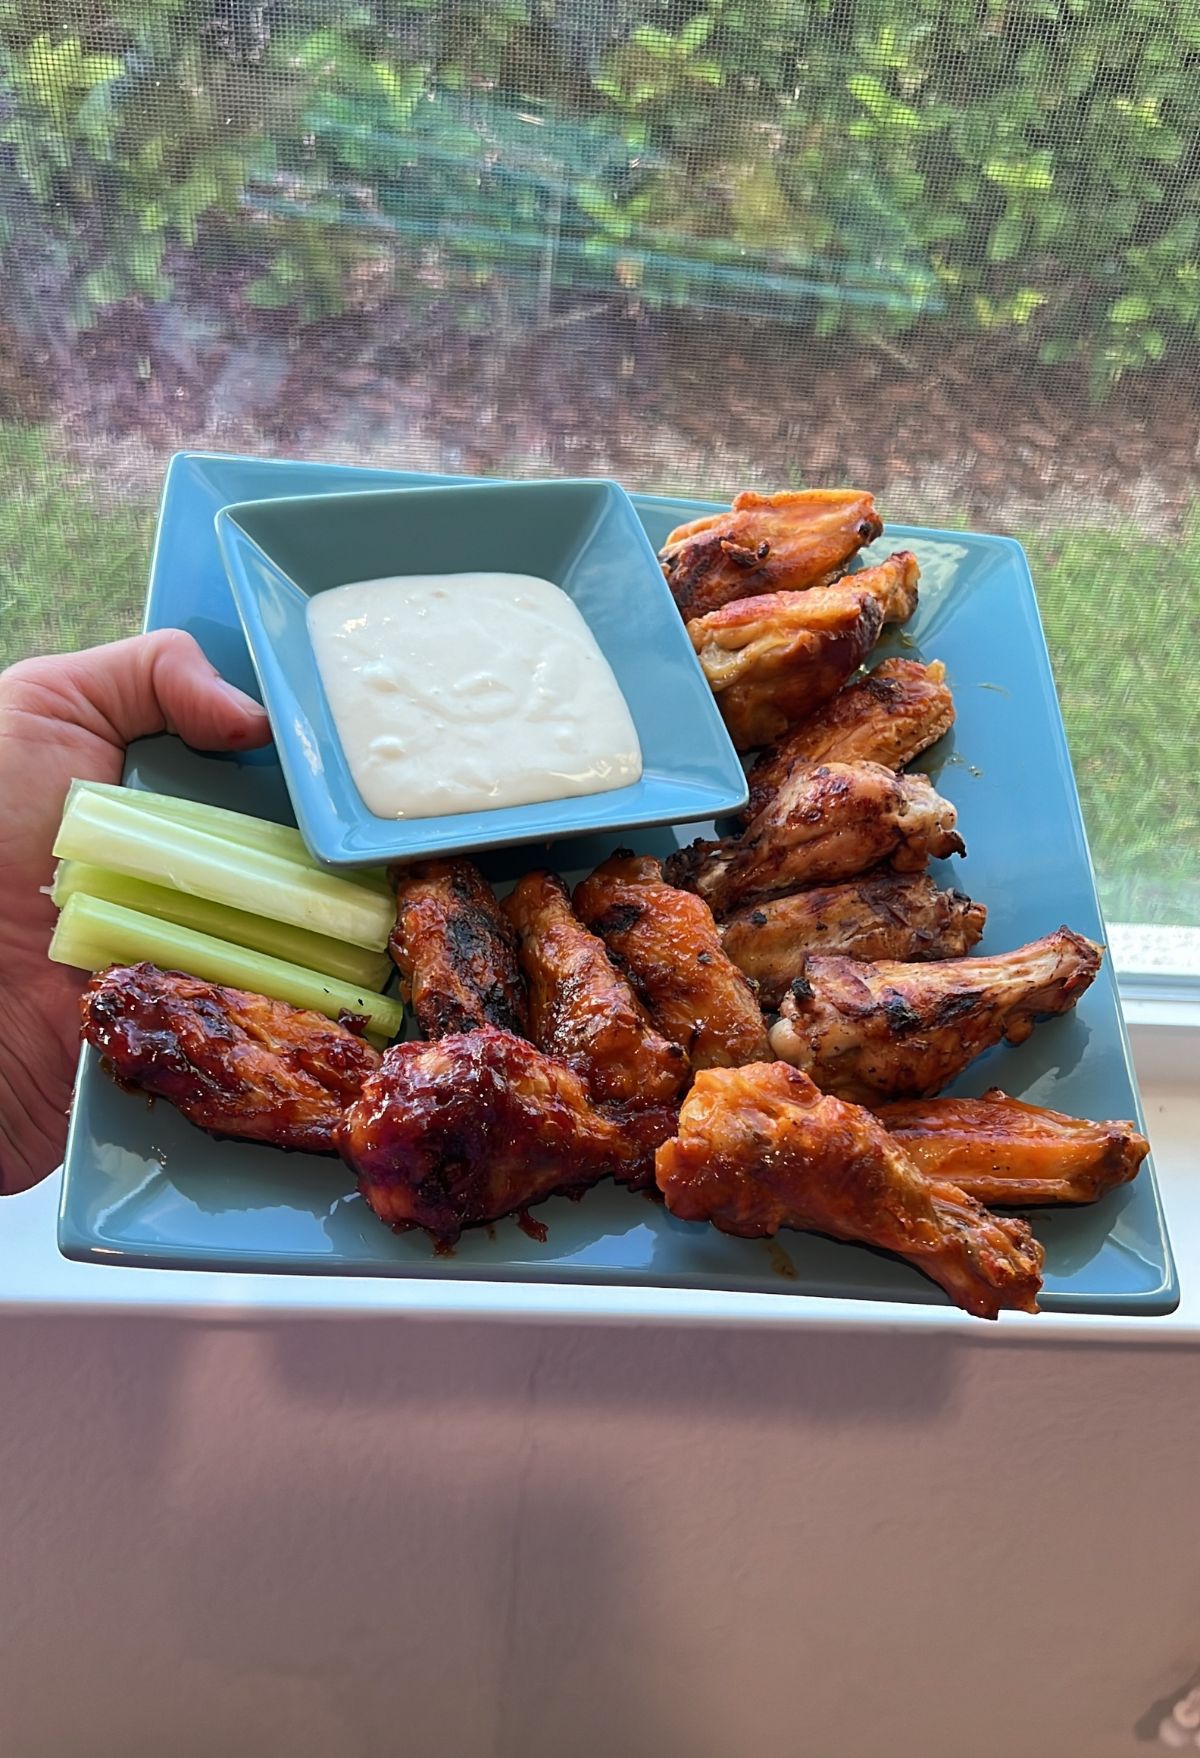 A plate of chicken wings and celery sticks.